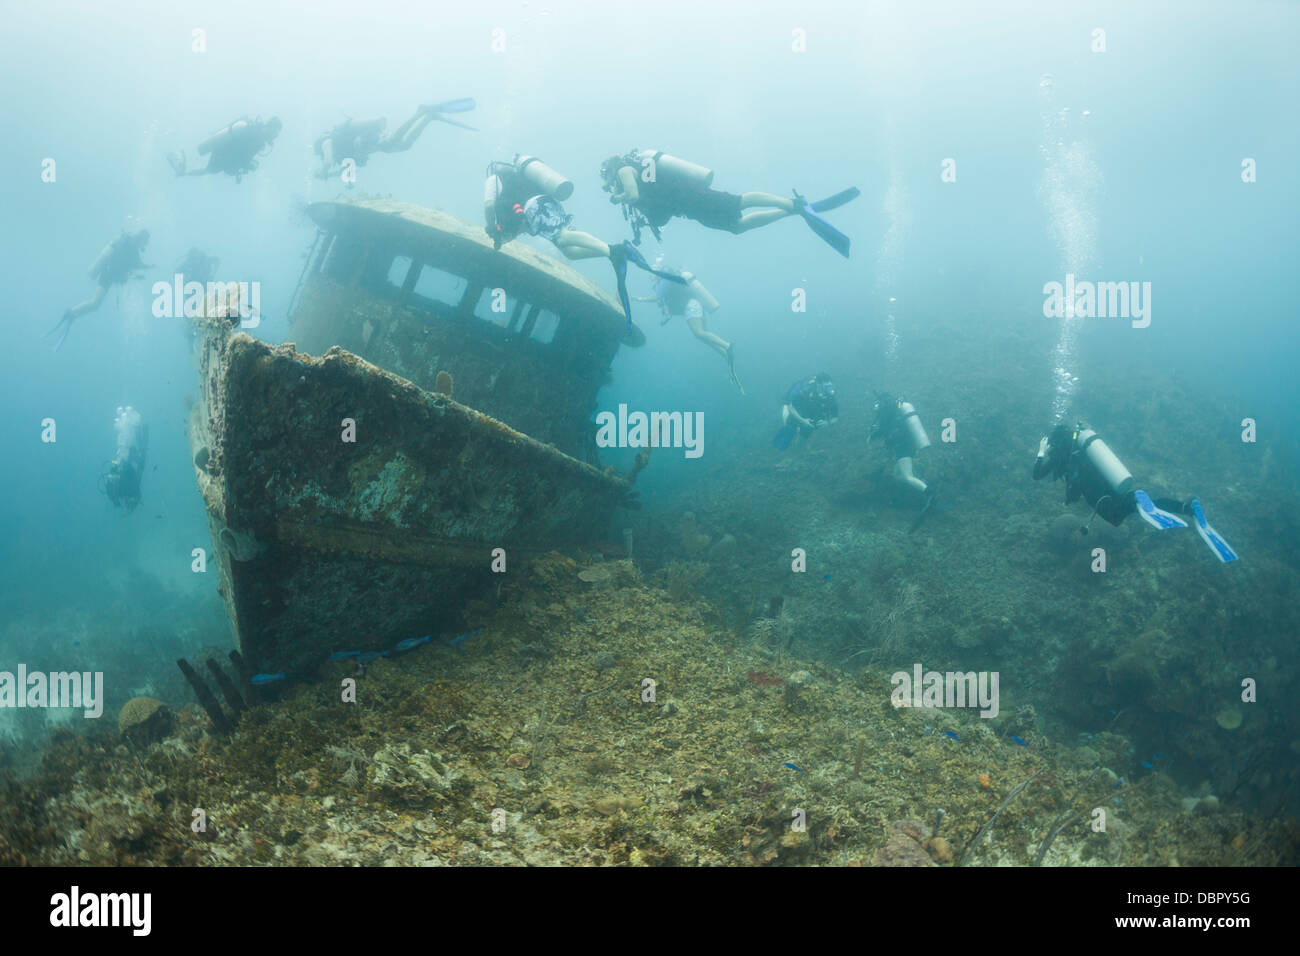 Scuba divers encircling the wreck of the Mr. Bud, a former shrimping boat, scuttled off the island of Roatan, Honduras Stock Photo